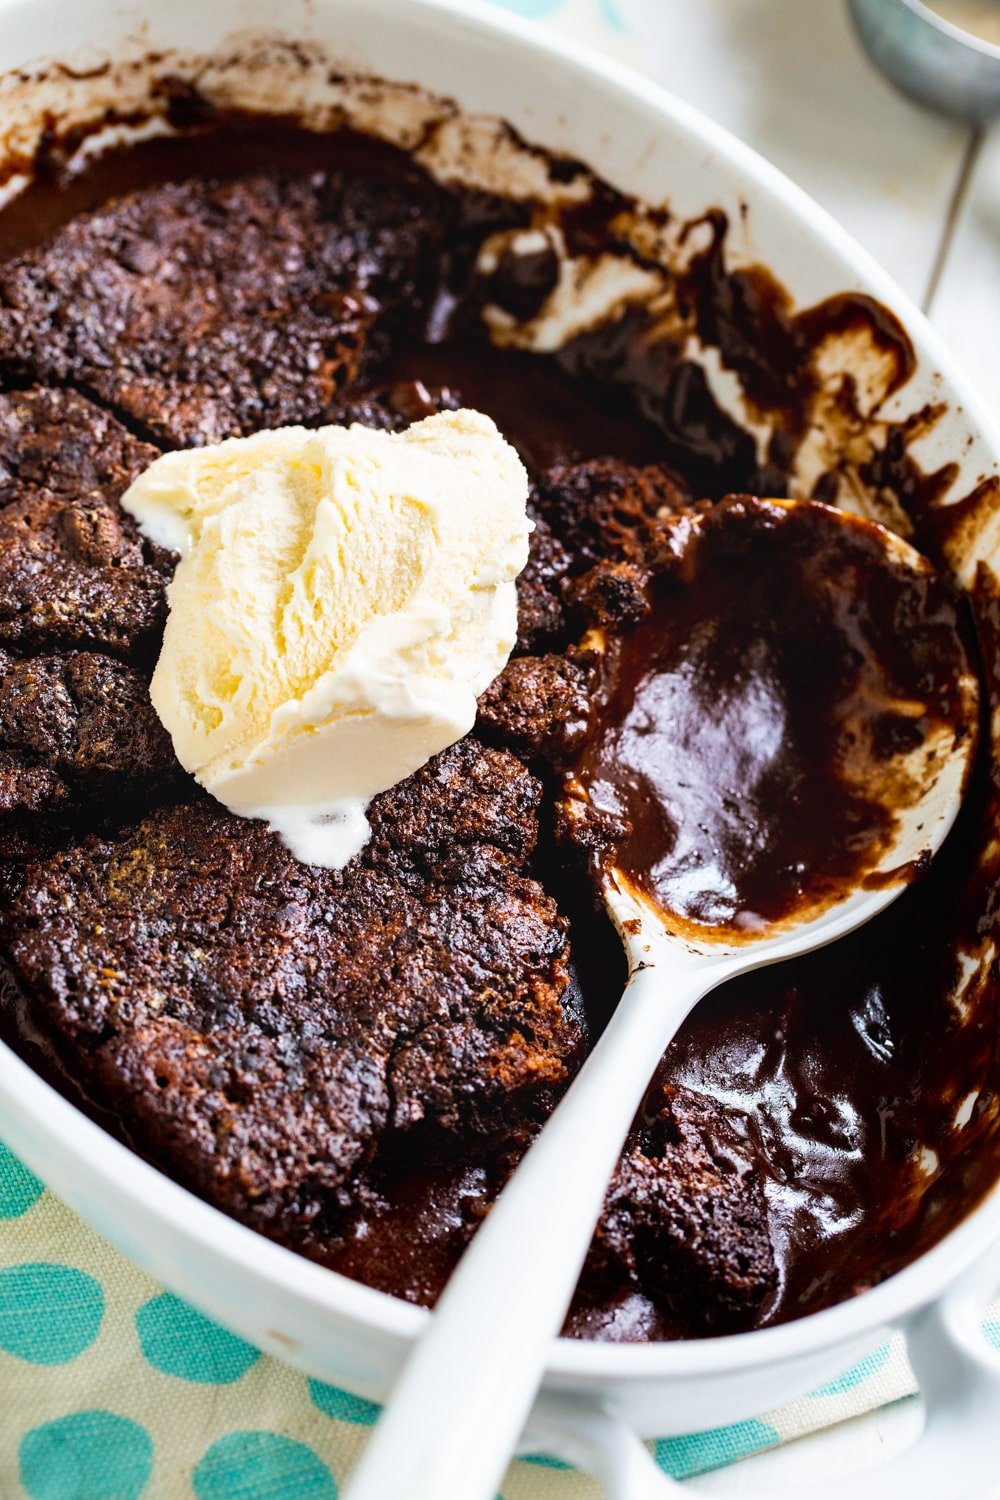 Chocolate Cobbler topped with ice cream in baking dish.